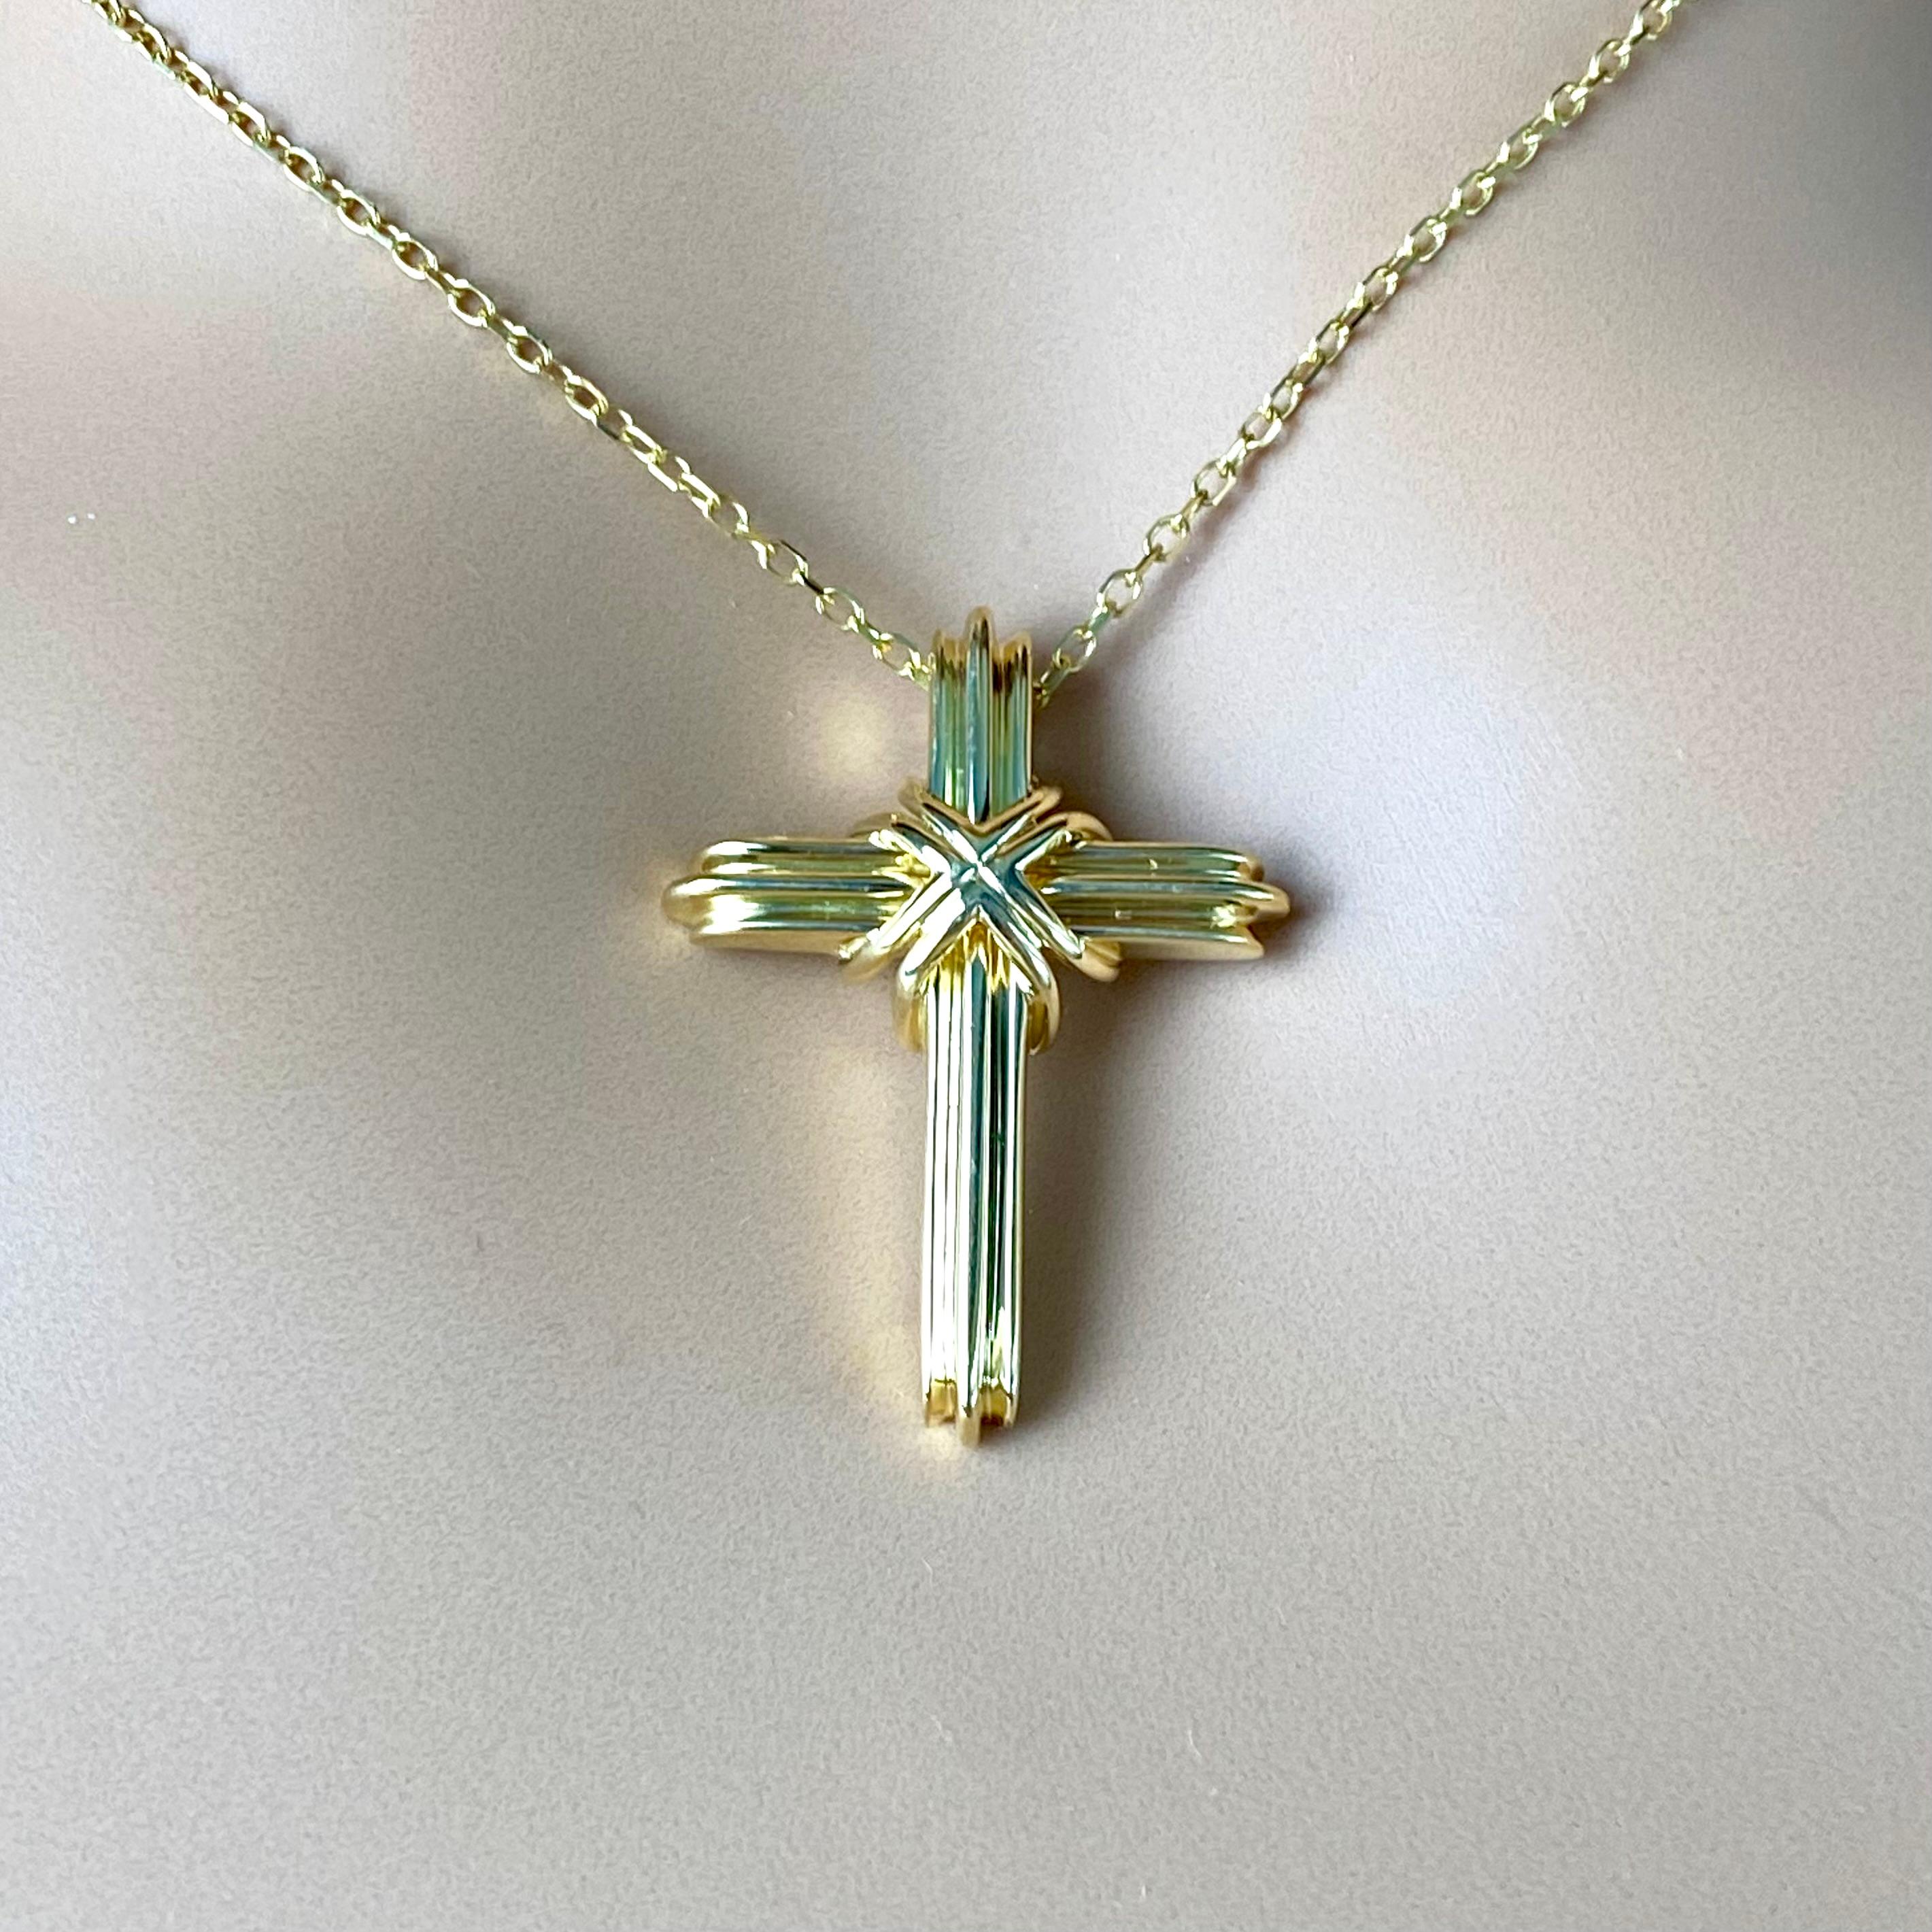 Introducing a timeless symbol of faith and elegance – the Tiffany & Co 18k Gold Cross Pendant. Crafted with precision and marked with the distinctive 